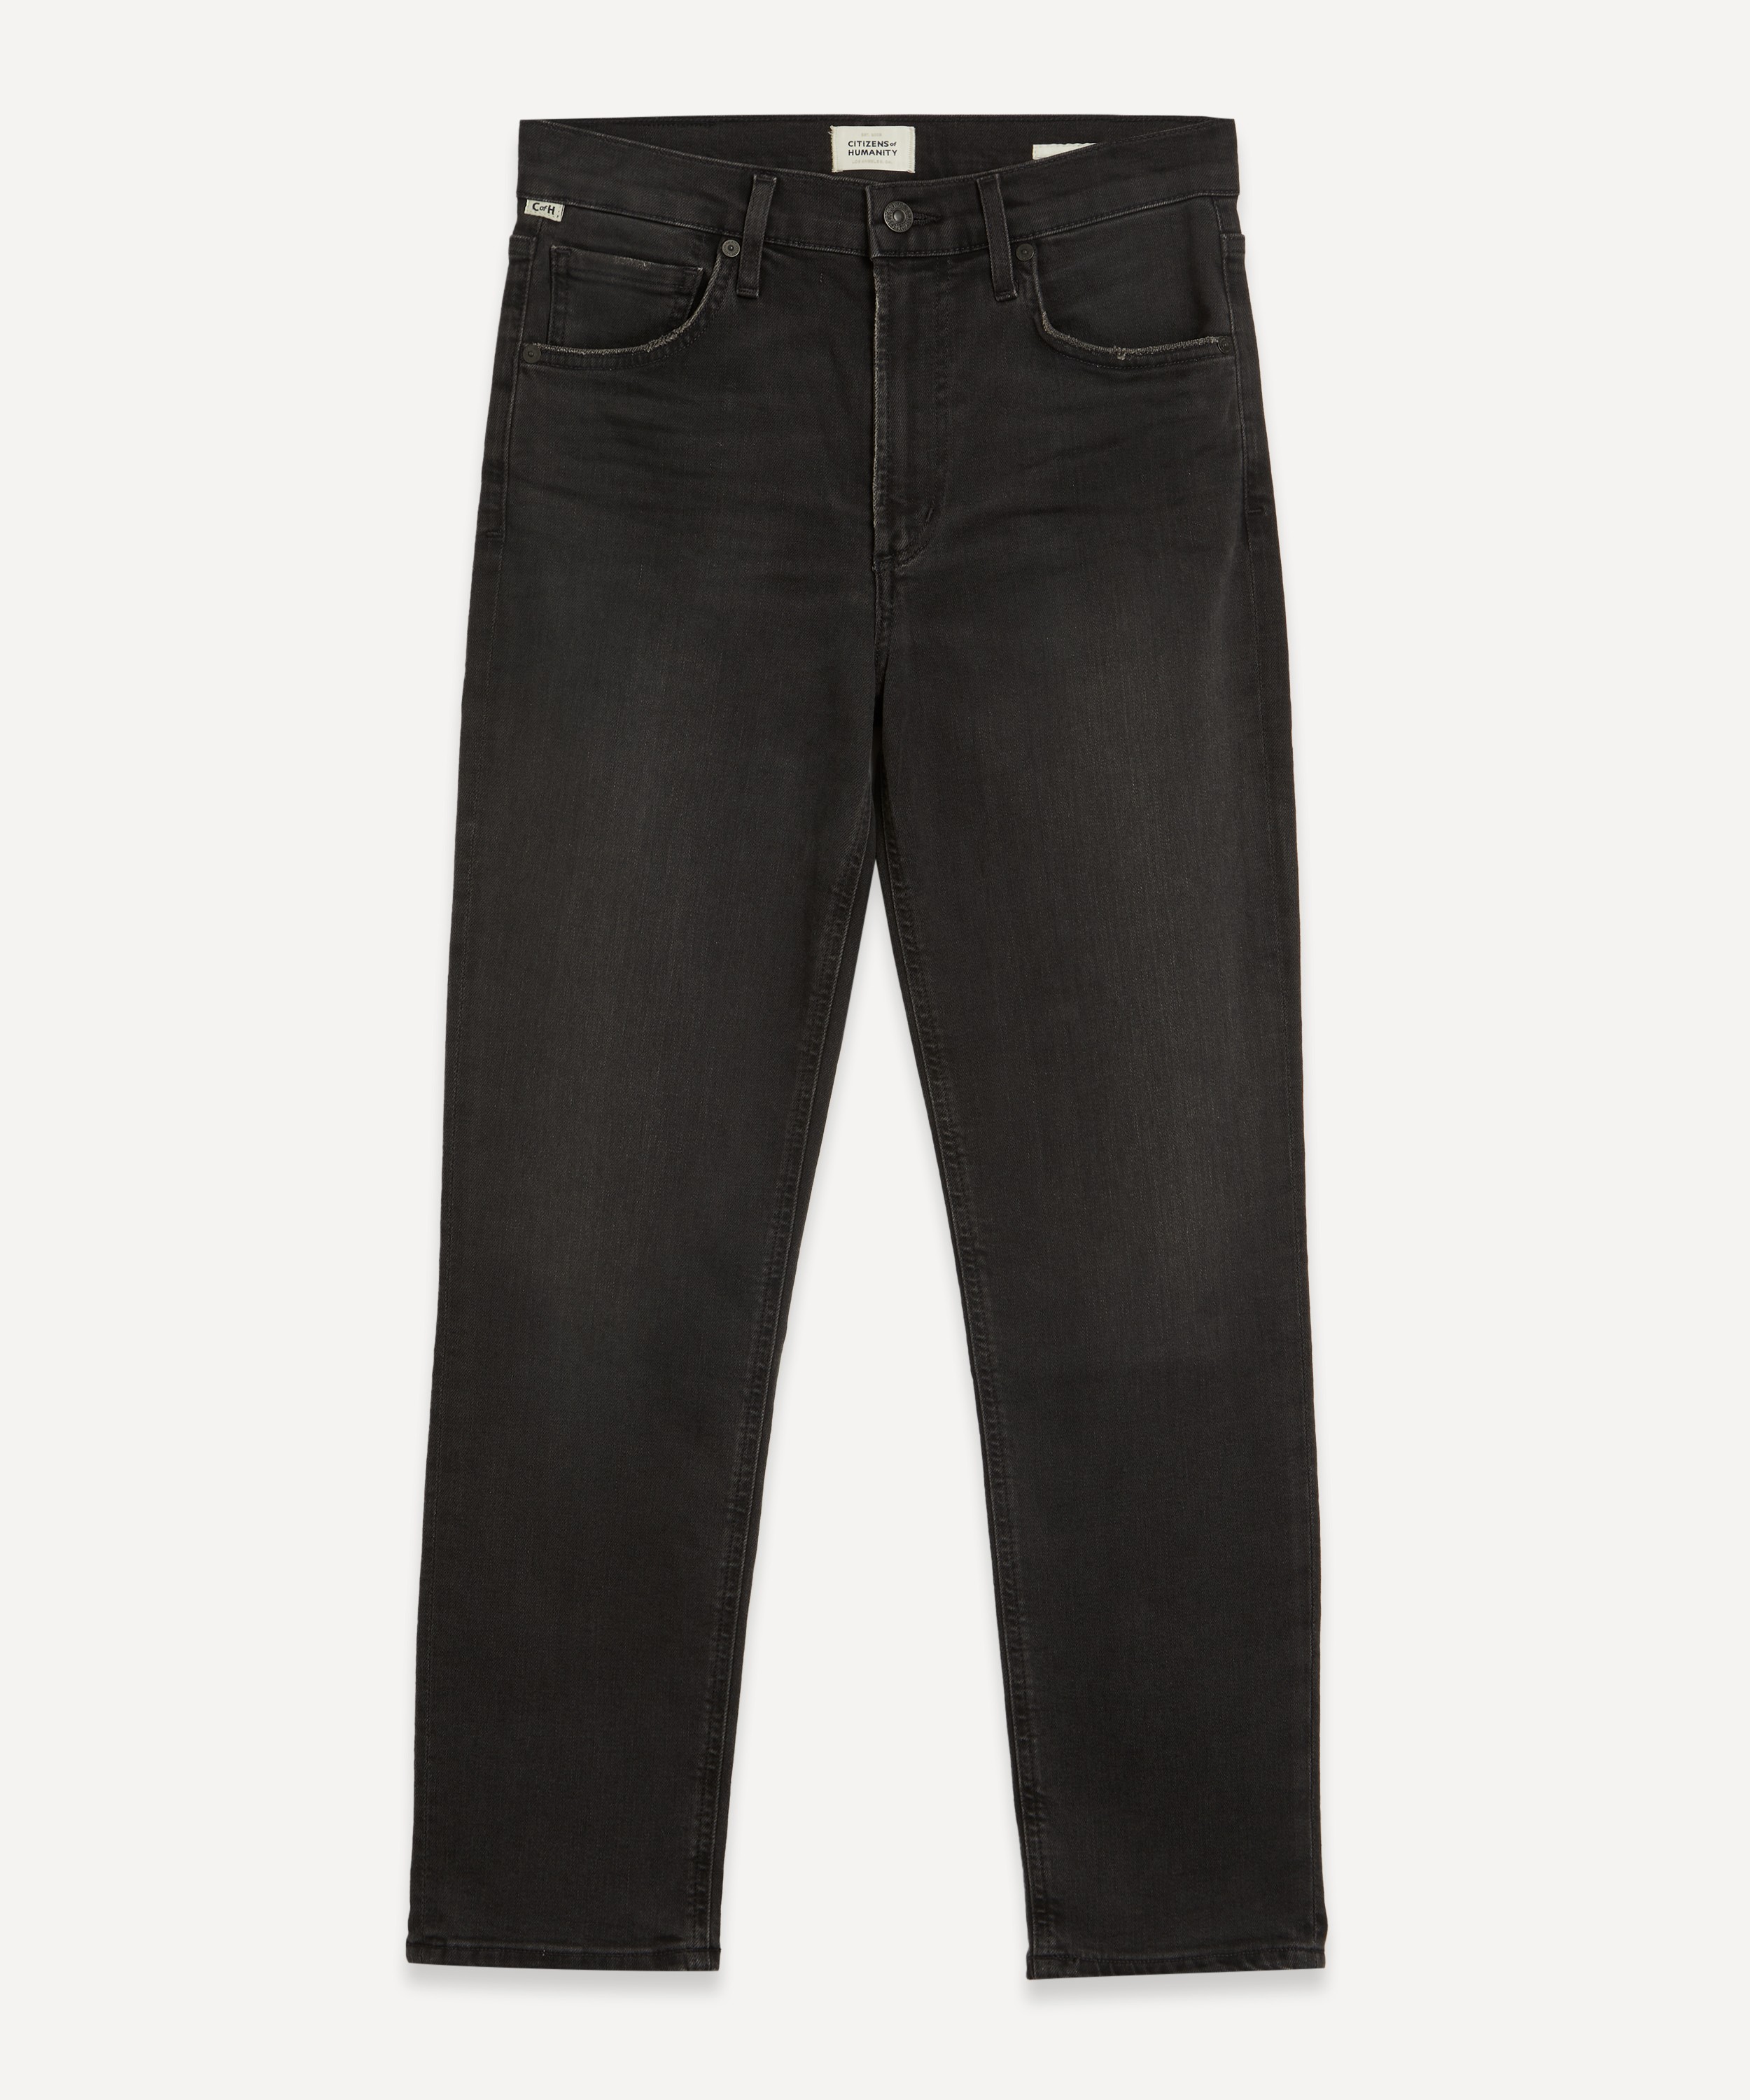 Citizens of Humanity - Isola Straight Crop Plush Black Jeans image number 0